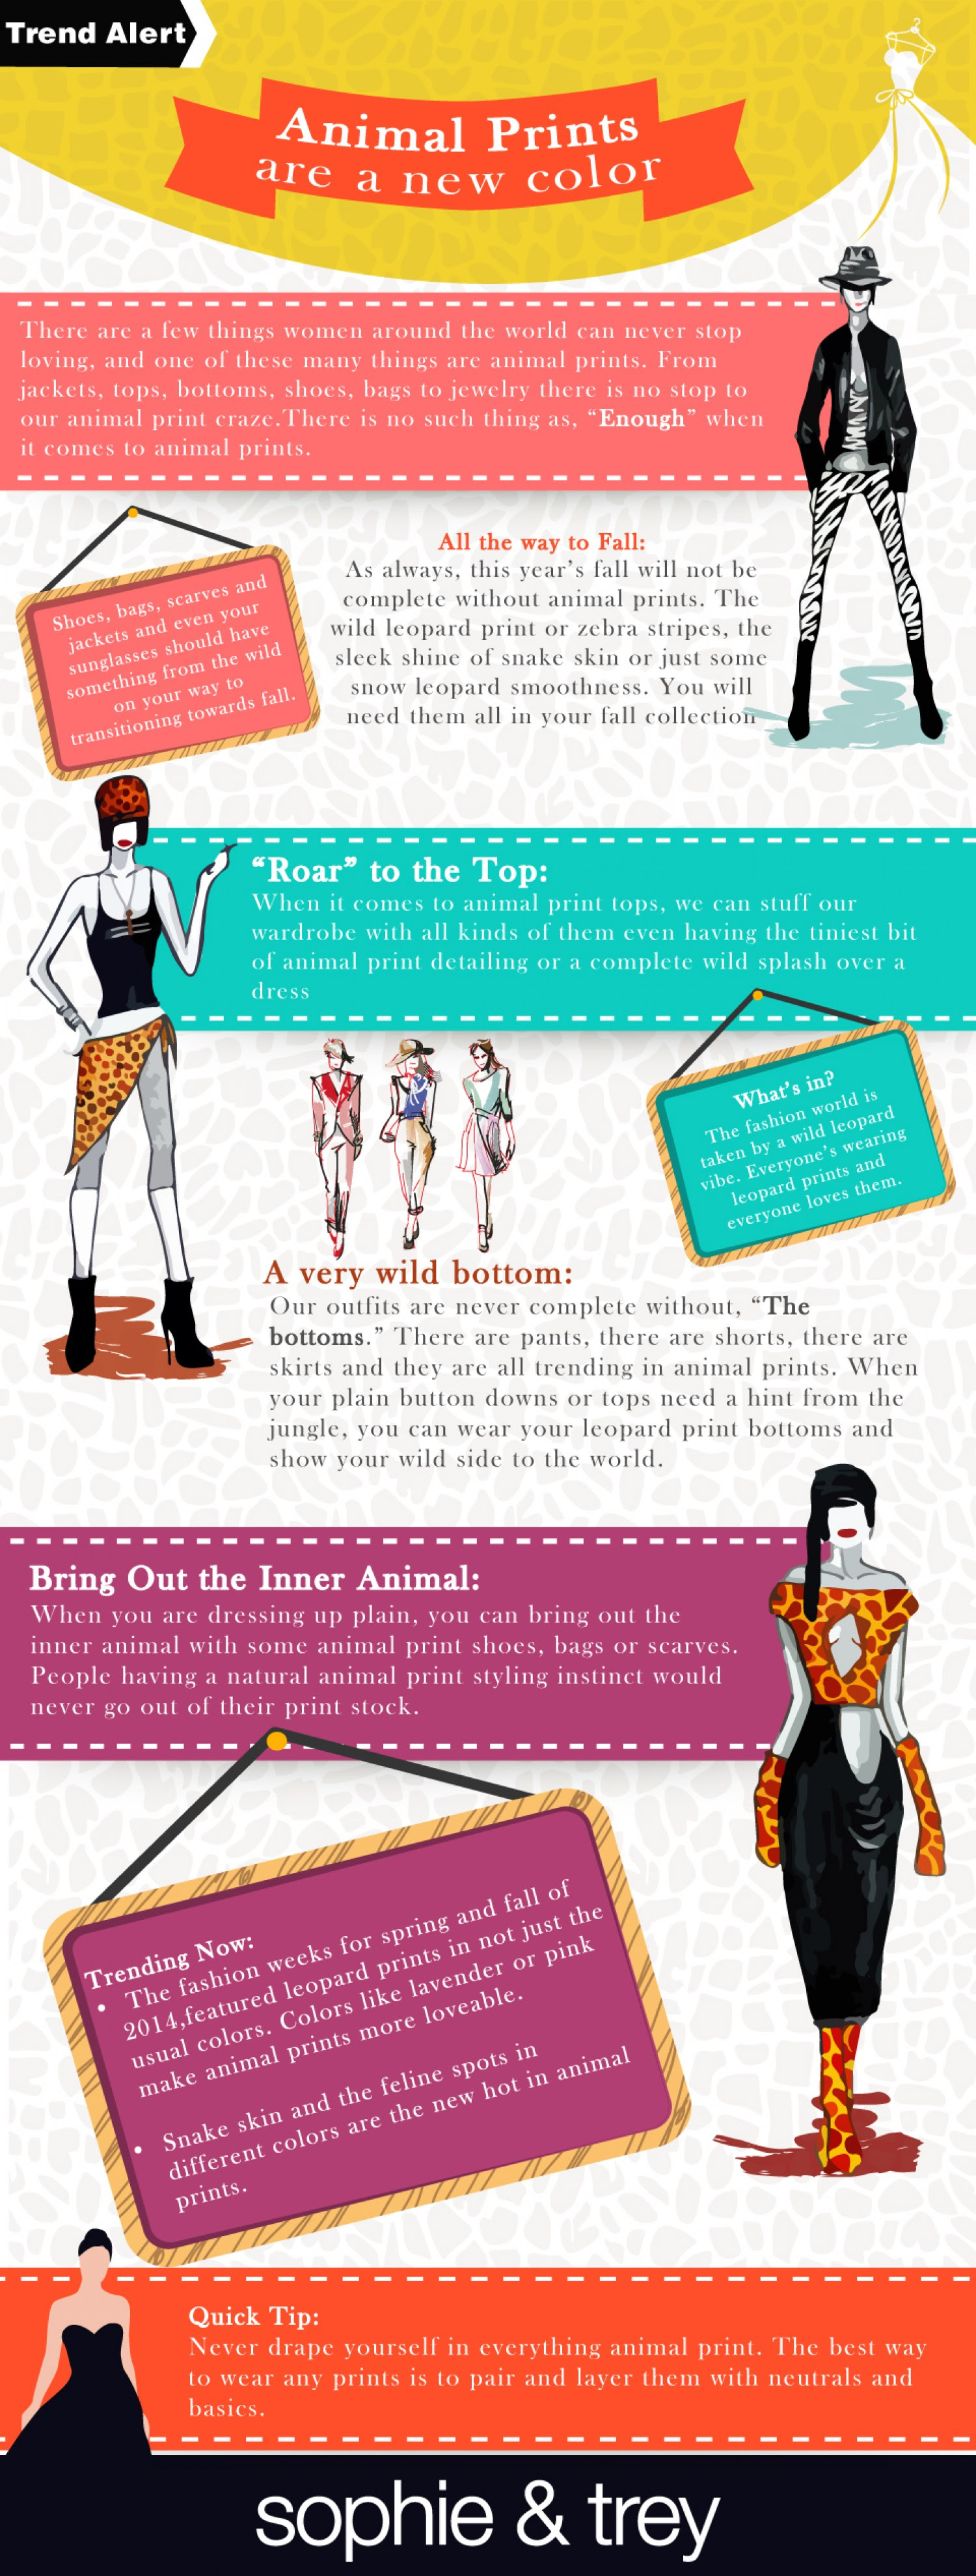 Infographic: Animal Prints Are a New Color